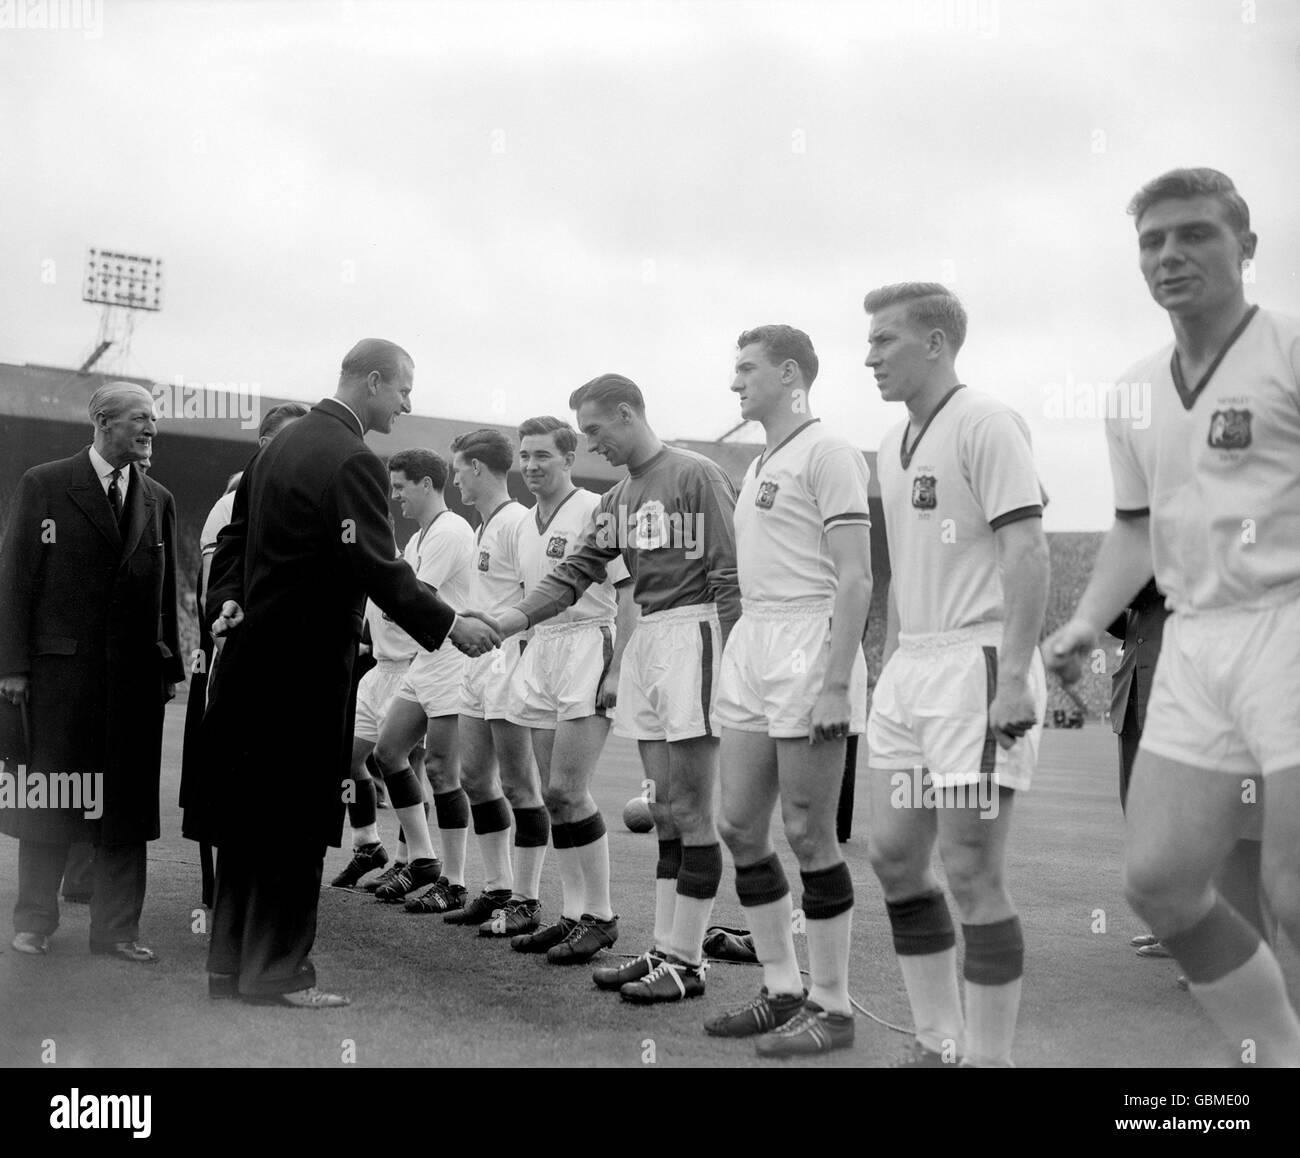 HRH The Duke of Edinburgh (l) shakes hands with Manchester United goalkeeper Ray Wood (fourth r) as United captain Roger Byrne (l, hidden) presents his team before the match. The other United players are (r-l) Duncan Edwards, Bobby Charlton, Bill Foulkes, Wood, Jackie Blanchflower, Liam Whelan, Tommy Taylor Stock Photo